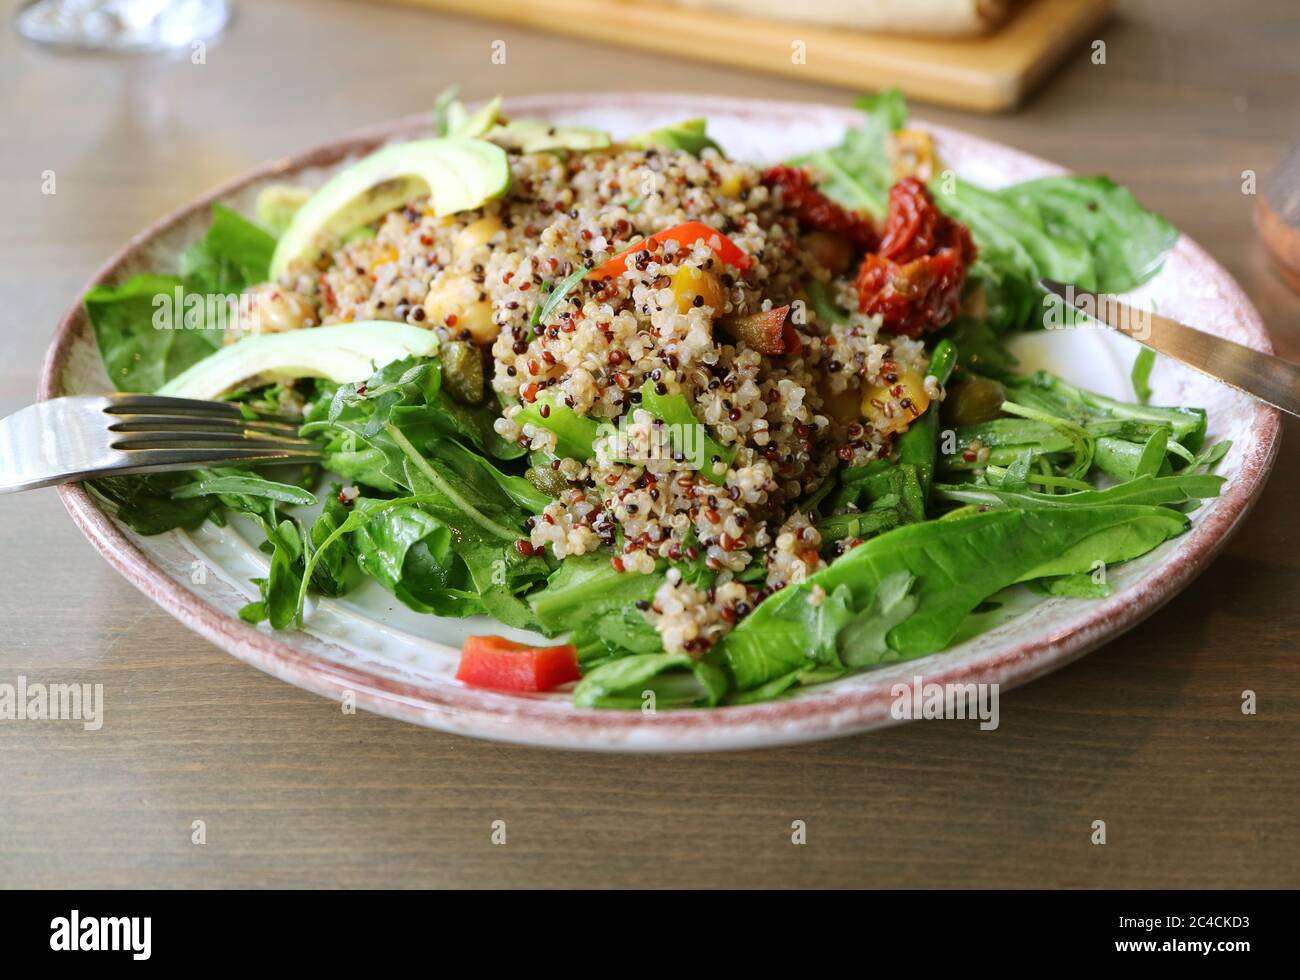 Plate of Quinoa Salad with Arugula and Avocado Served on Wooden Table Stock Photo